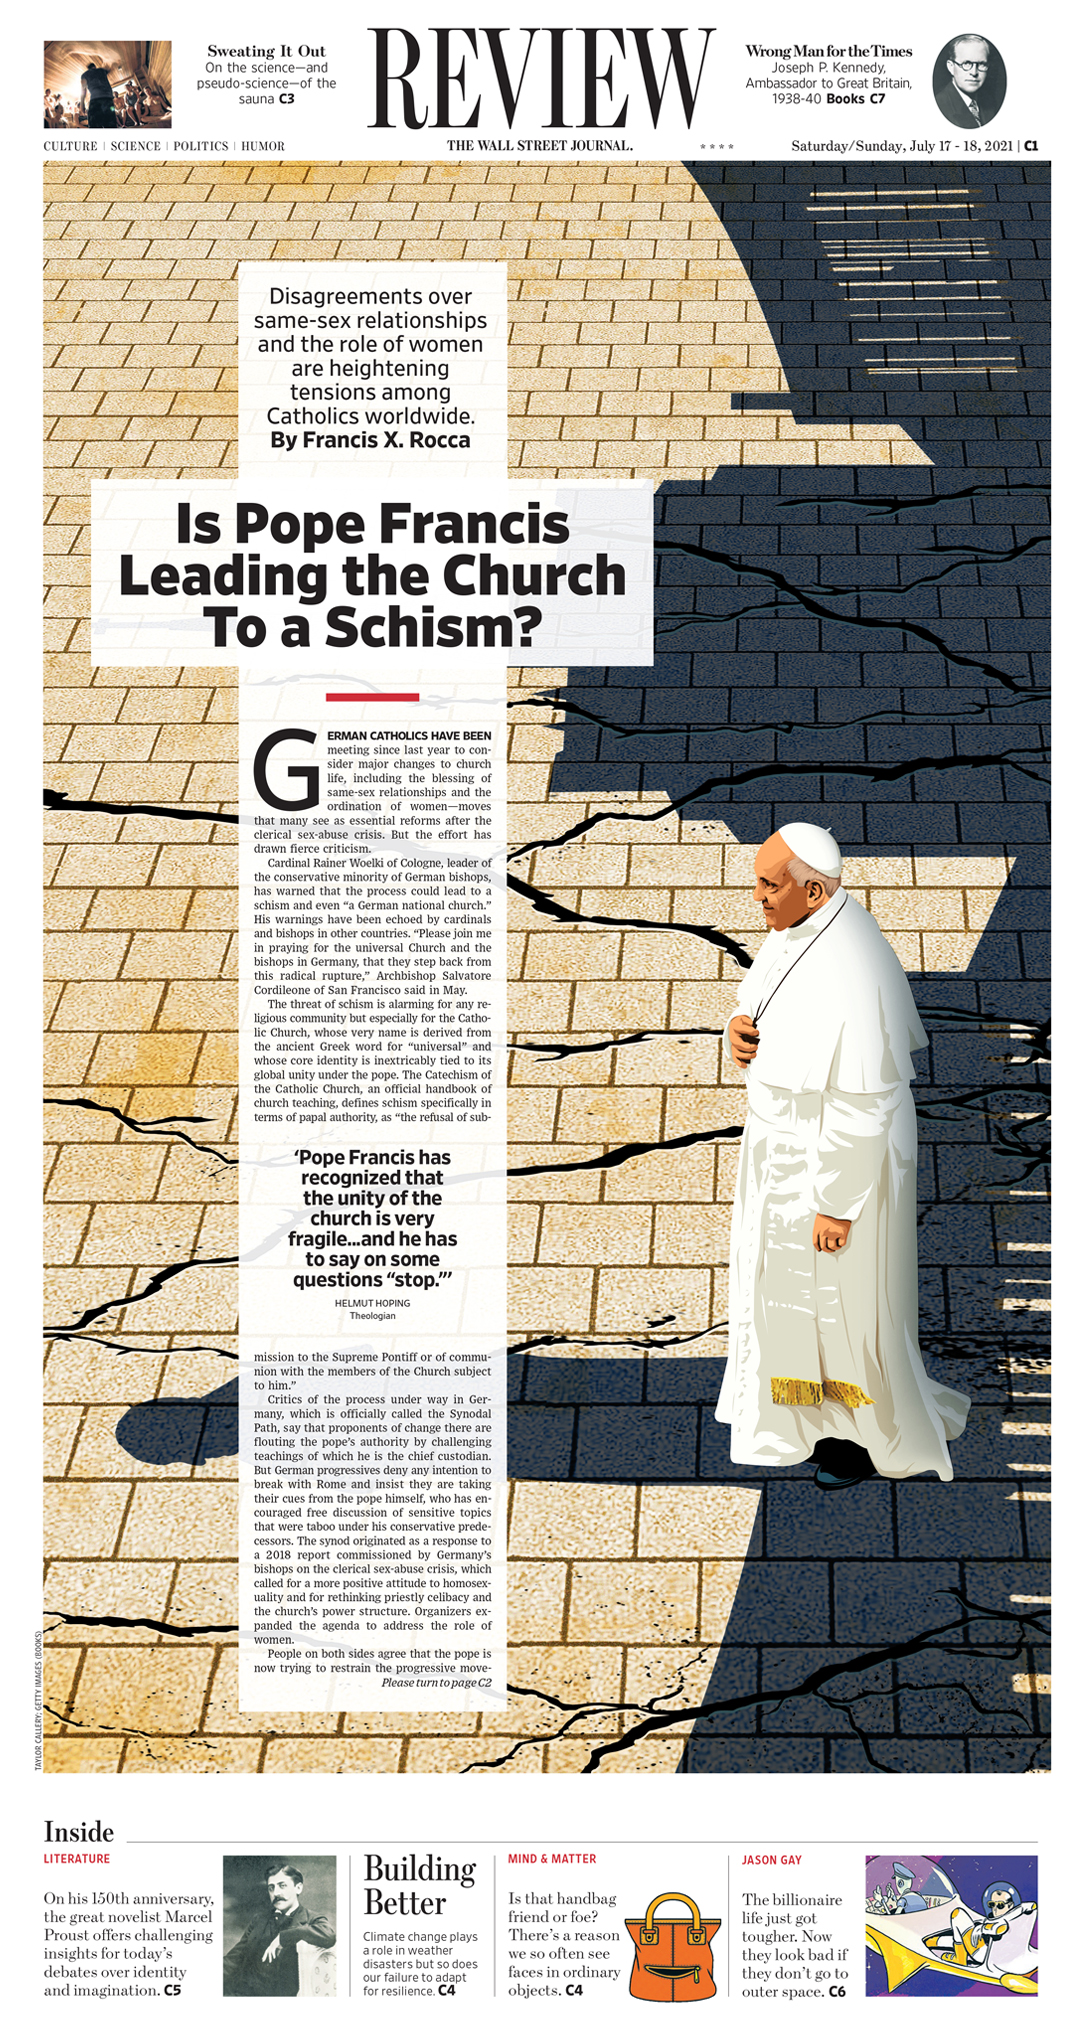 https://rappart.com/wp-content/uploads/2021/07/1A-WSJ-Pope-Schism-Cover-Layout-100x100.jpg